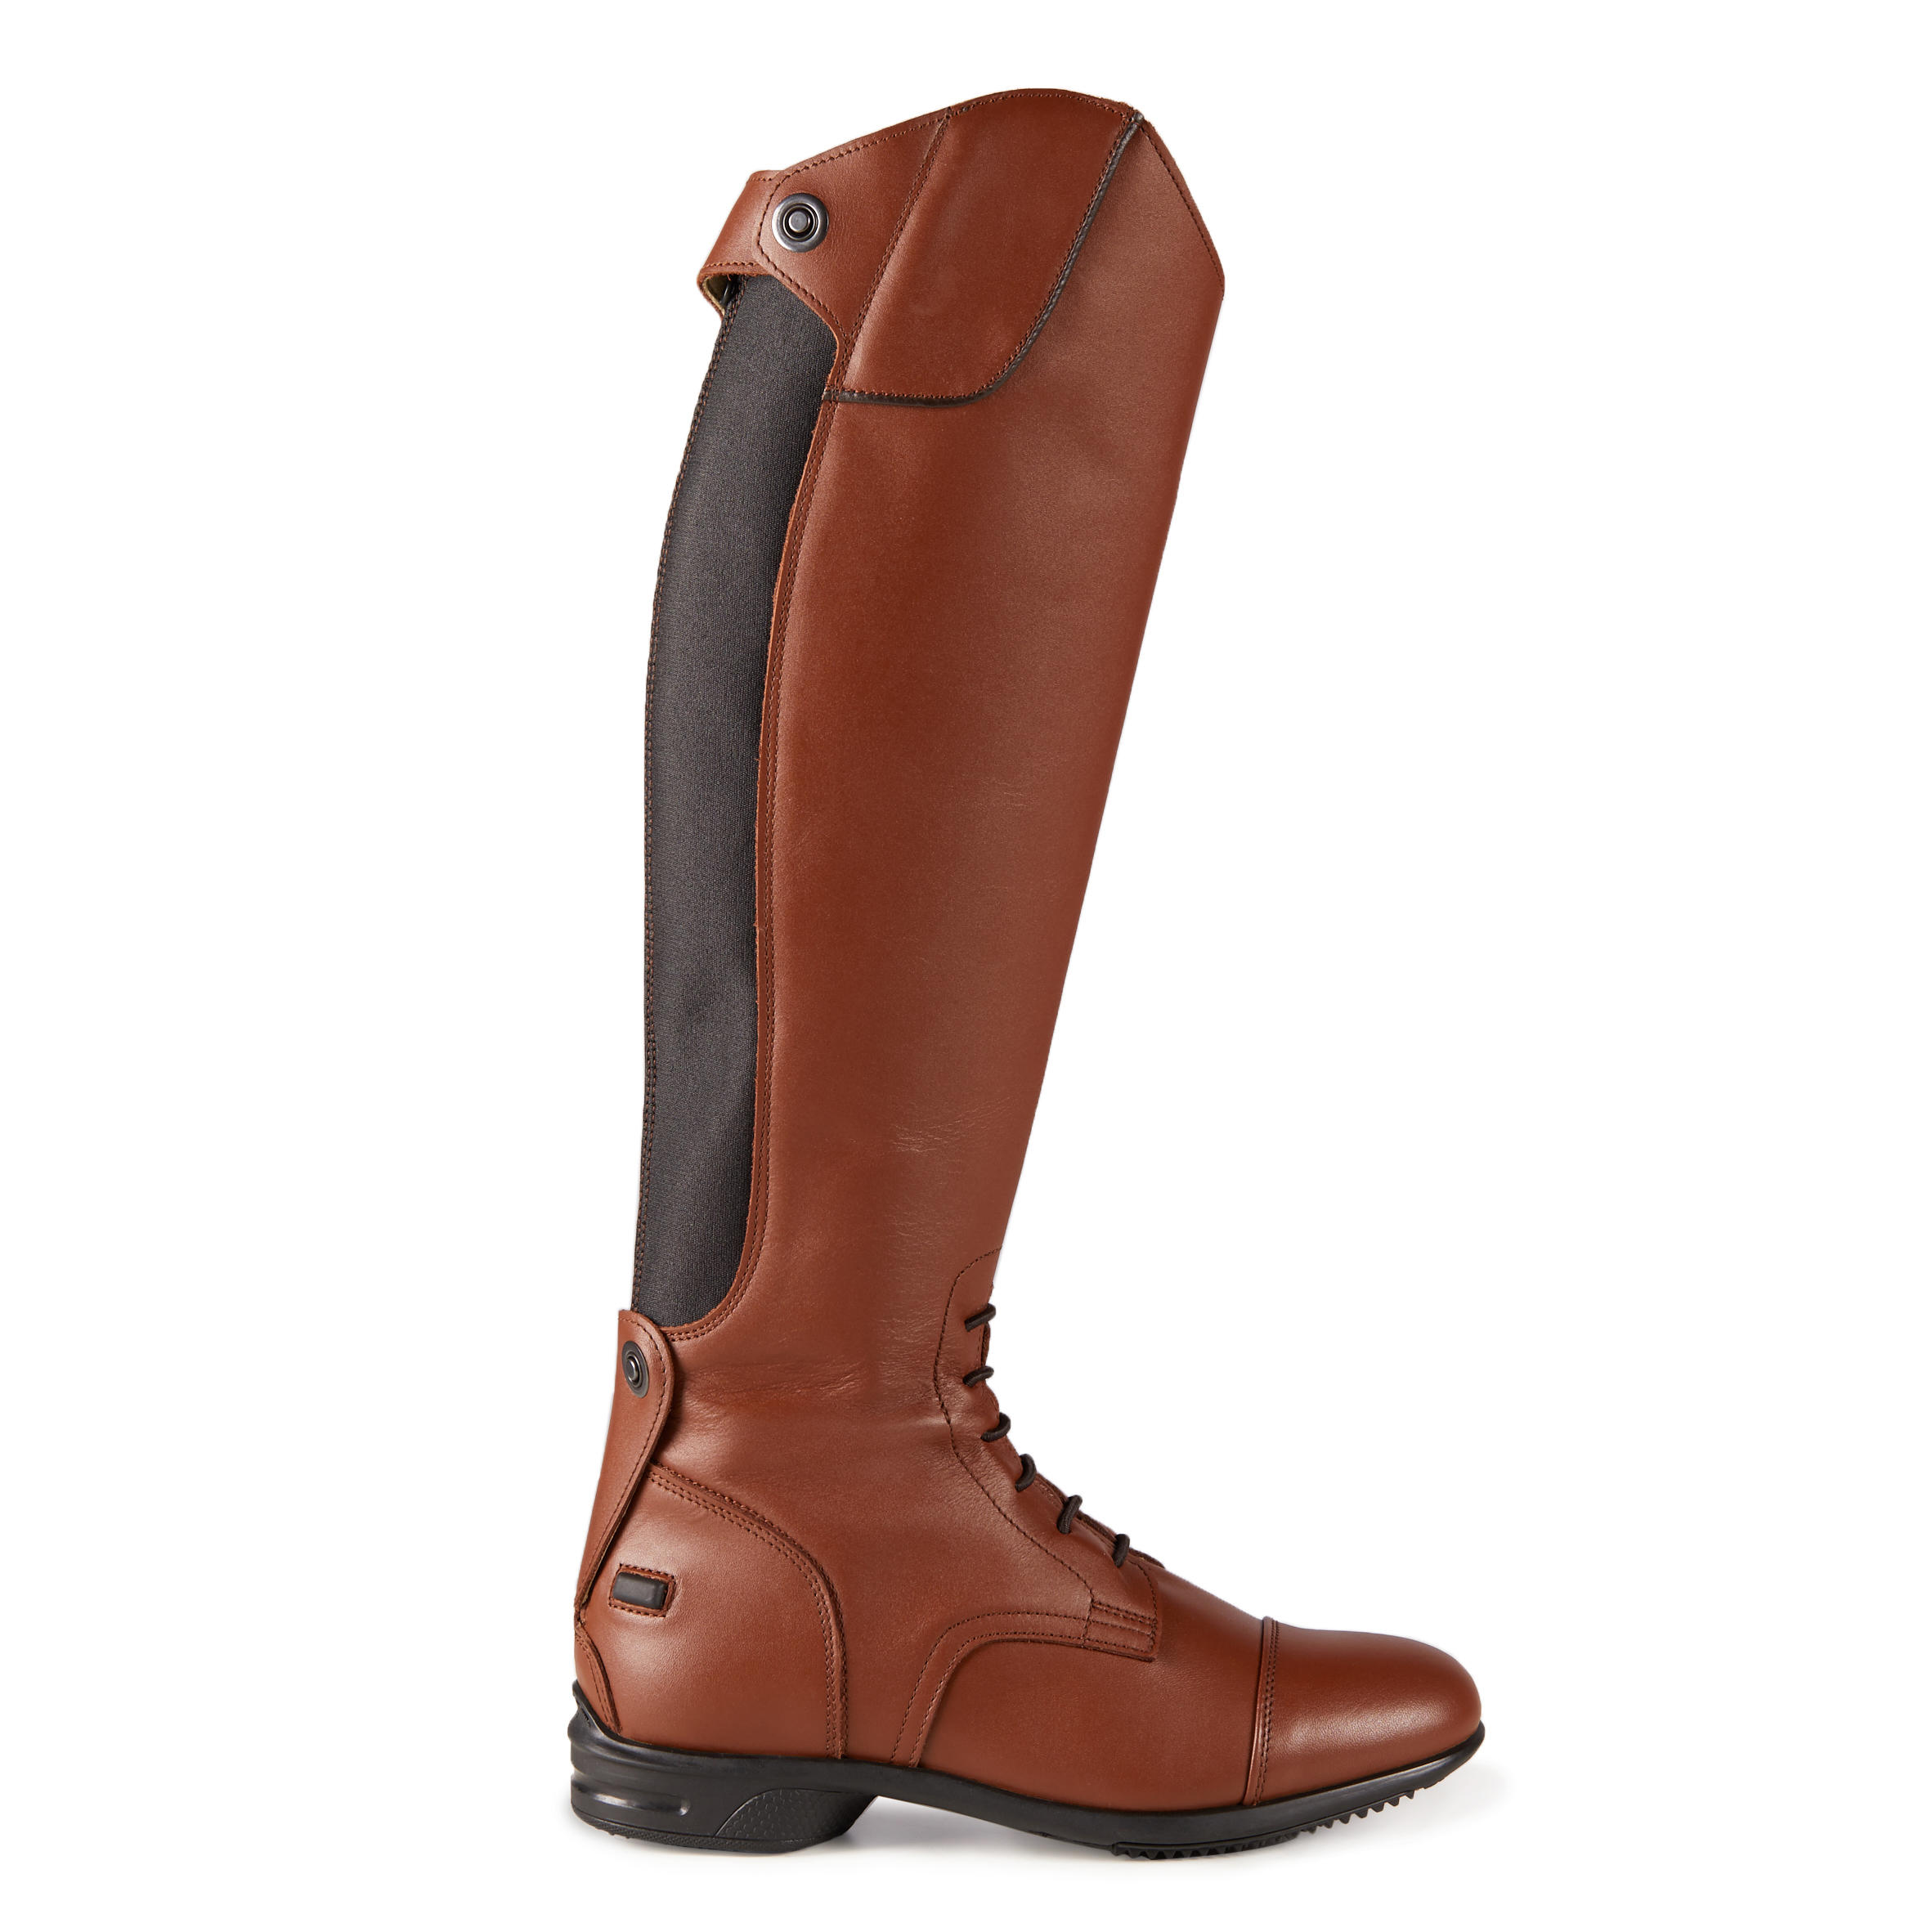 900 Jump M Adult Horse Riding Leather Long Boots - Brown 6/16